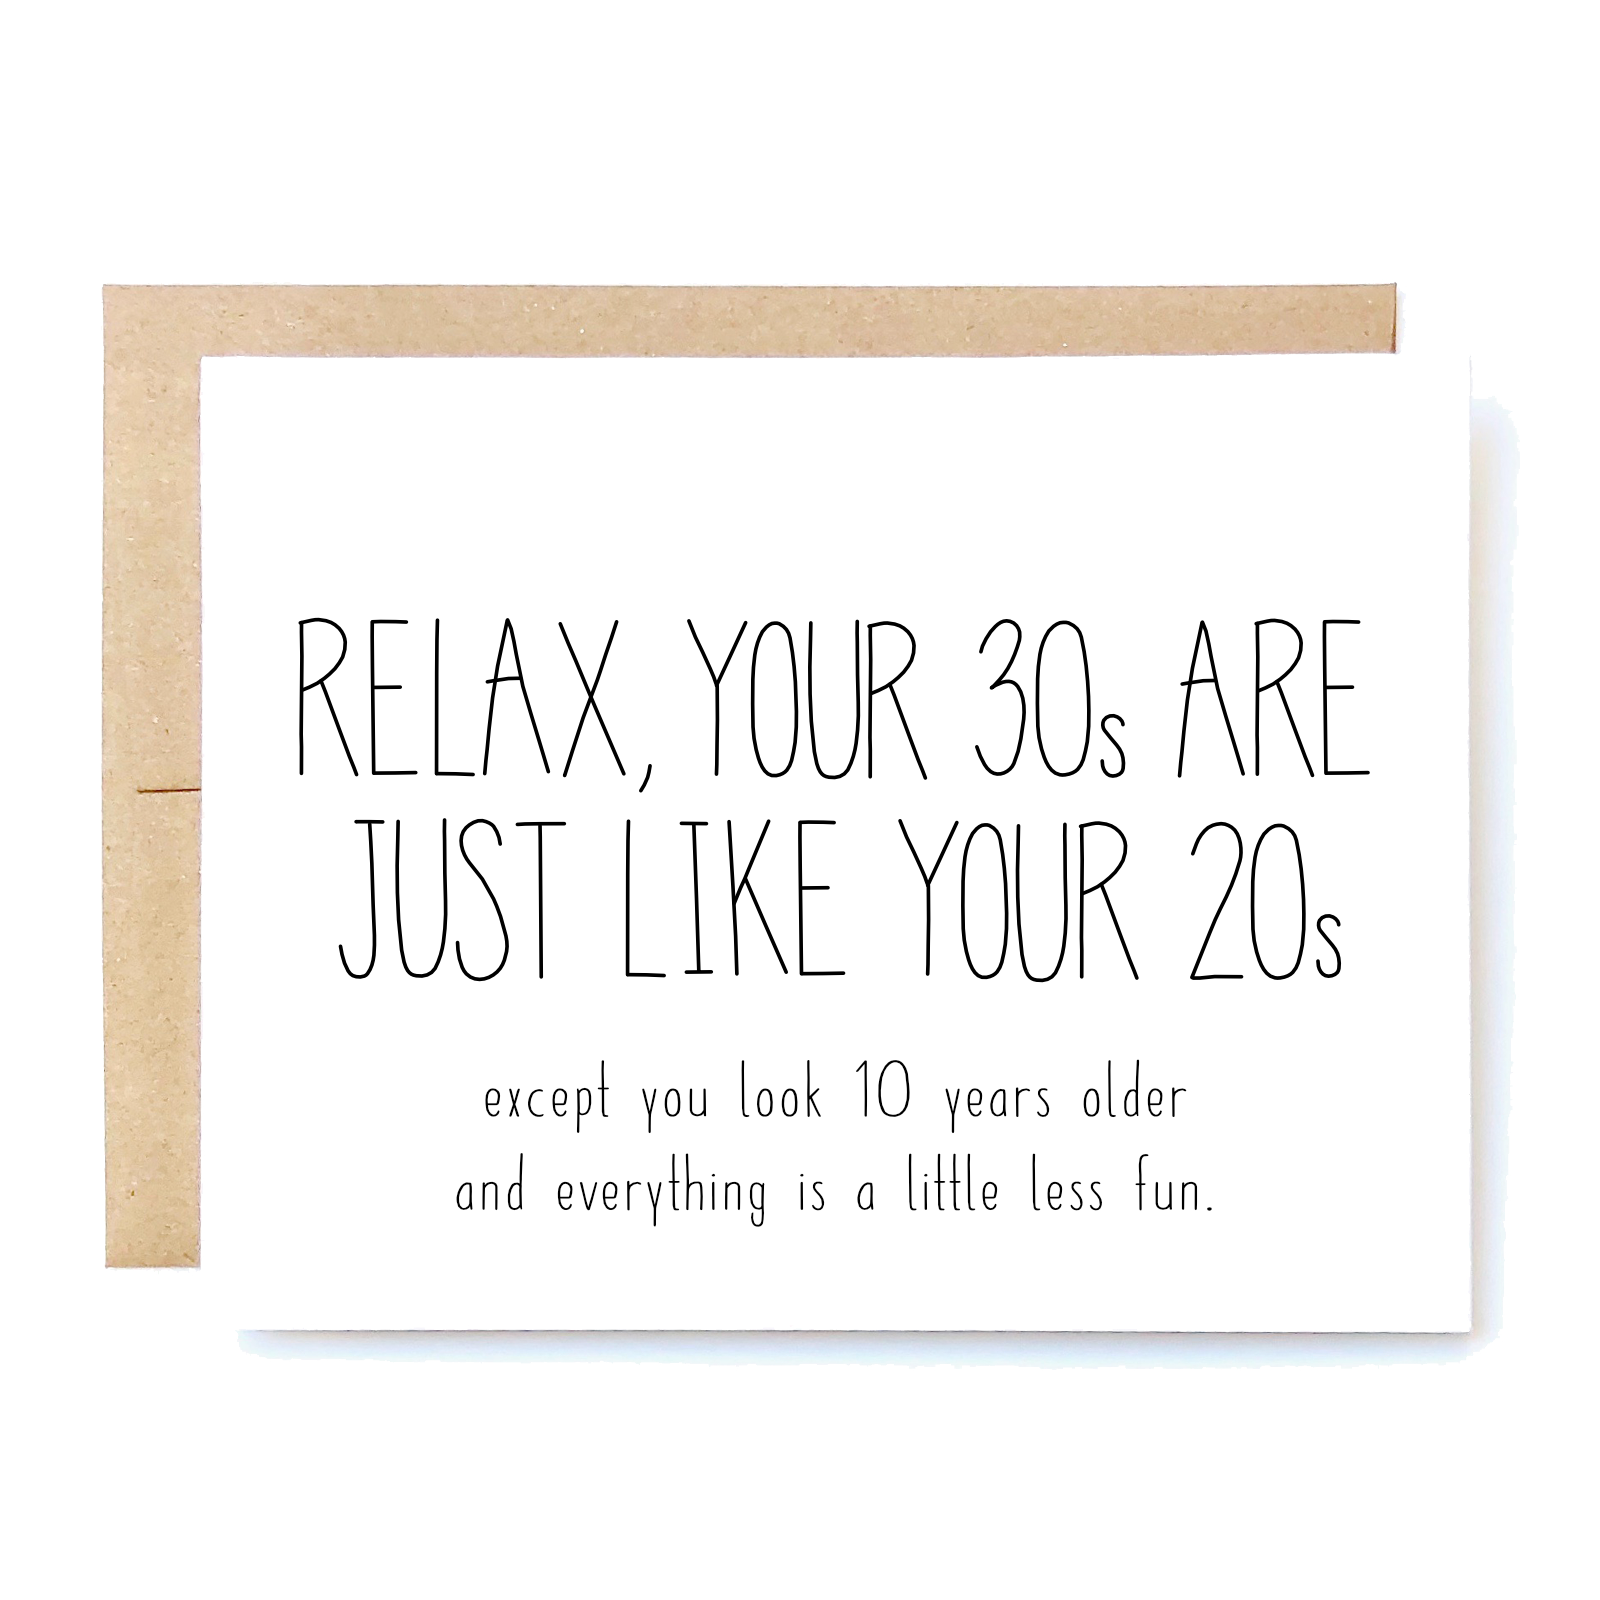 Card Front: (Birthday Card) Relax, Your 30s are Just Like Your 20s, except you look 10 years older and everything is a little less fun.